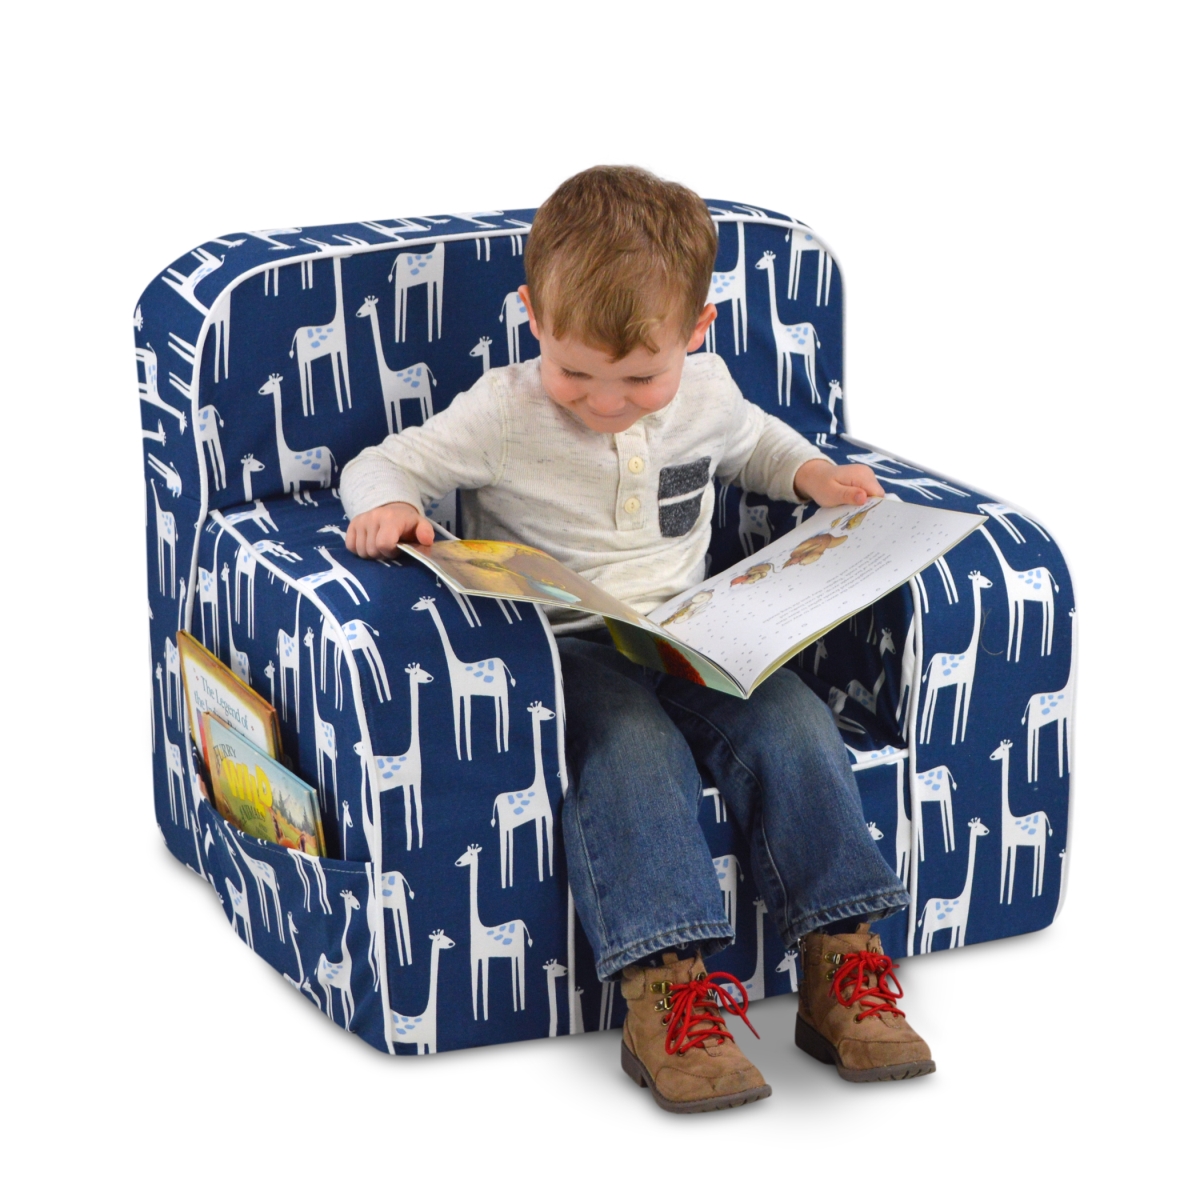 Kangaroo Trading 4090psw Mason Kids Grab-n-go Foam Chair With Handle & Storage Pockets & Patches Sky - Navy, White & Blue